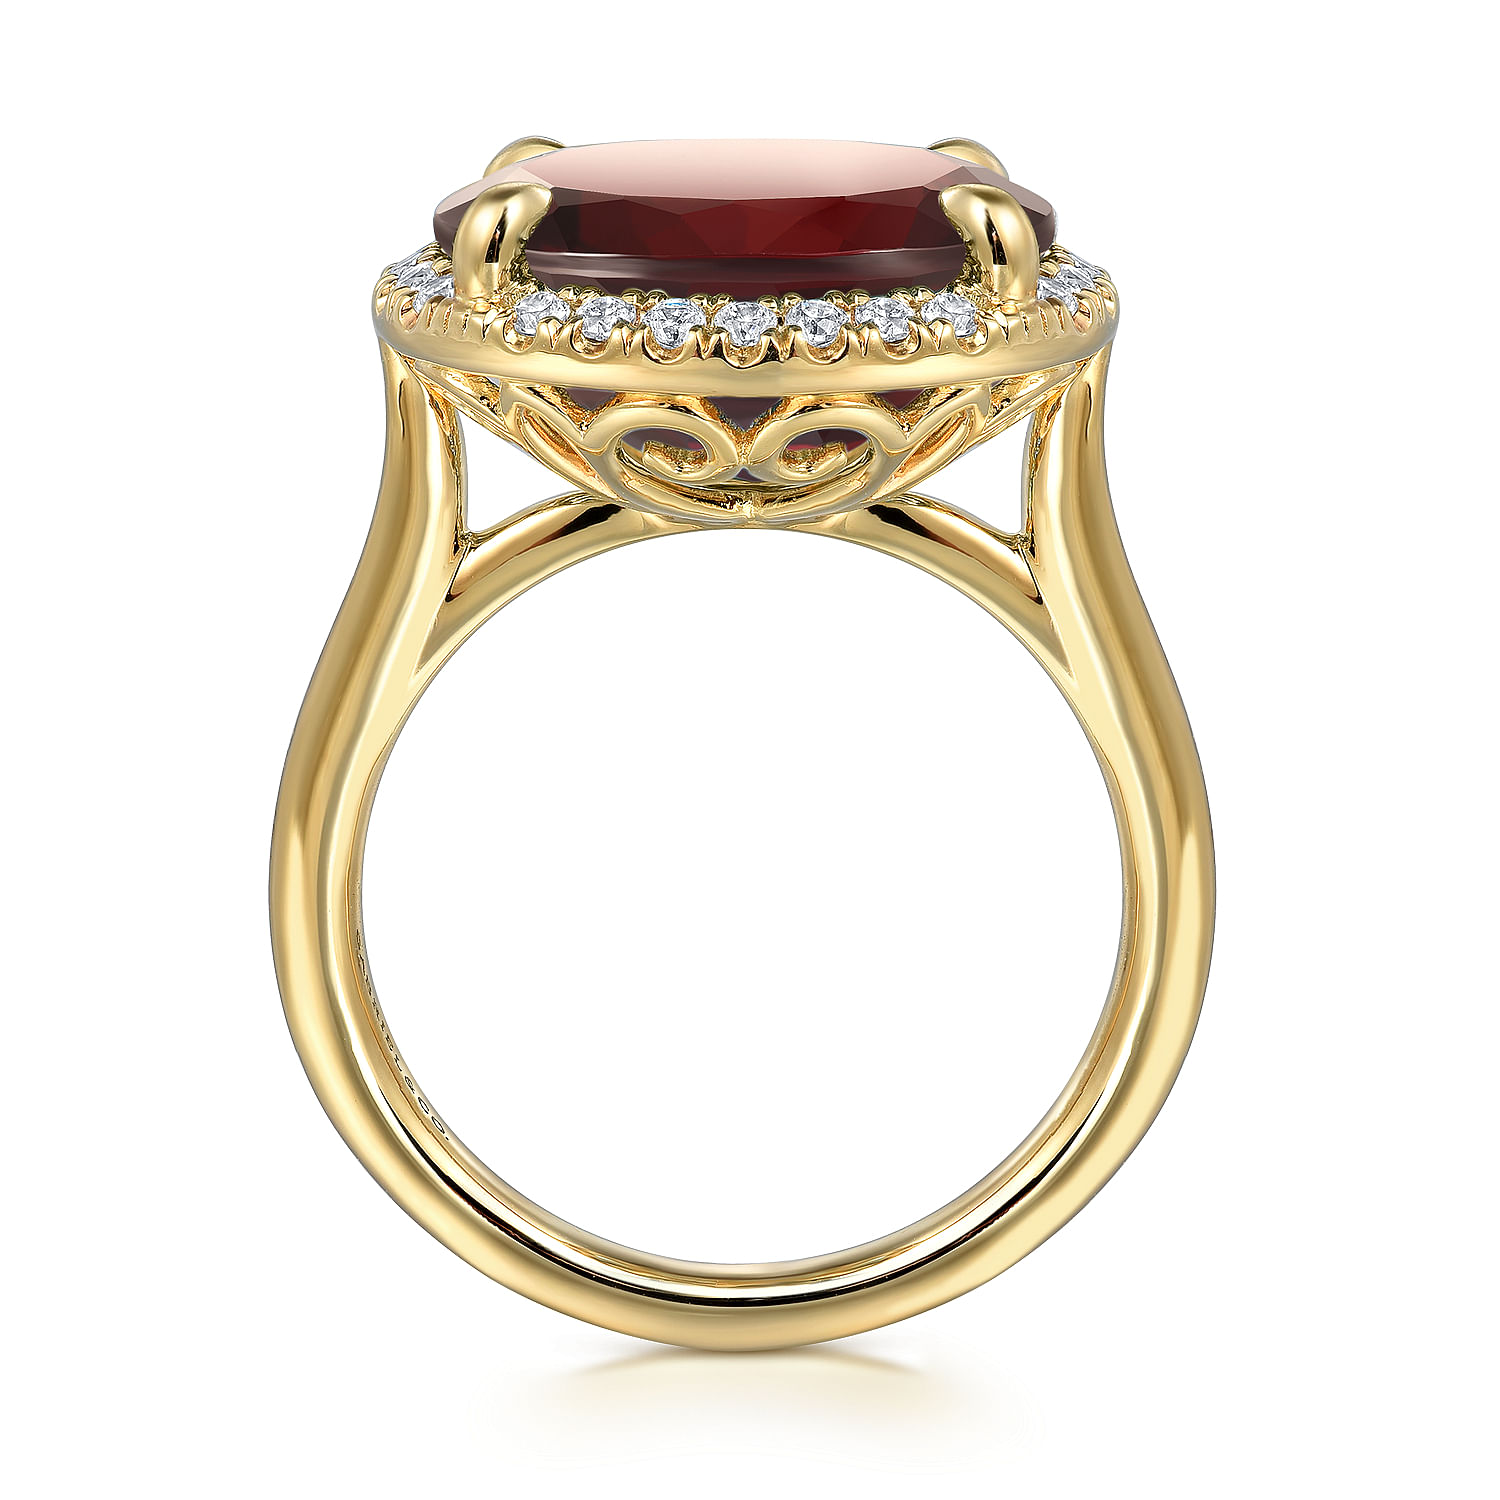 14K Yellow Gold Diamond and Oval Shape Garnet Ladies Ring With Flower Pattern Gallery